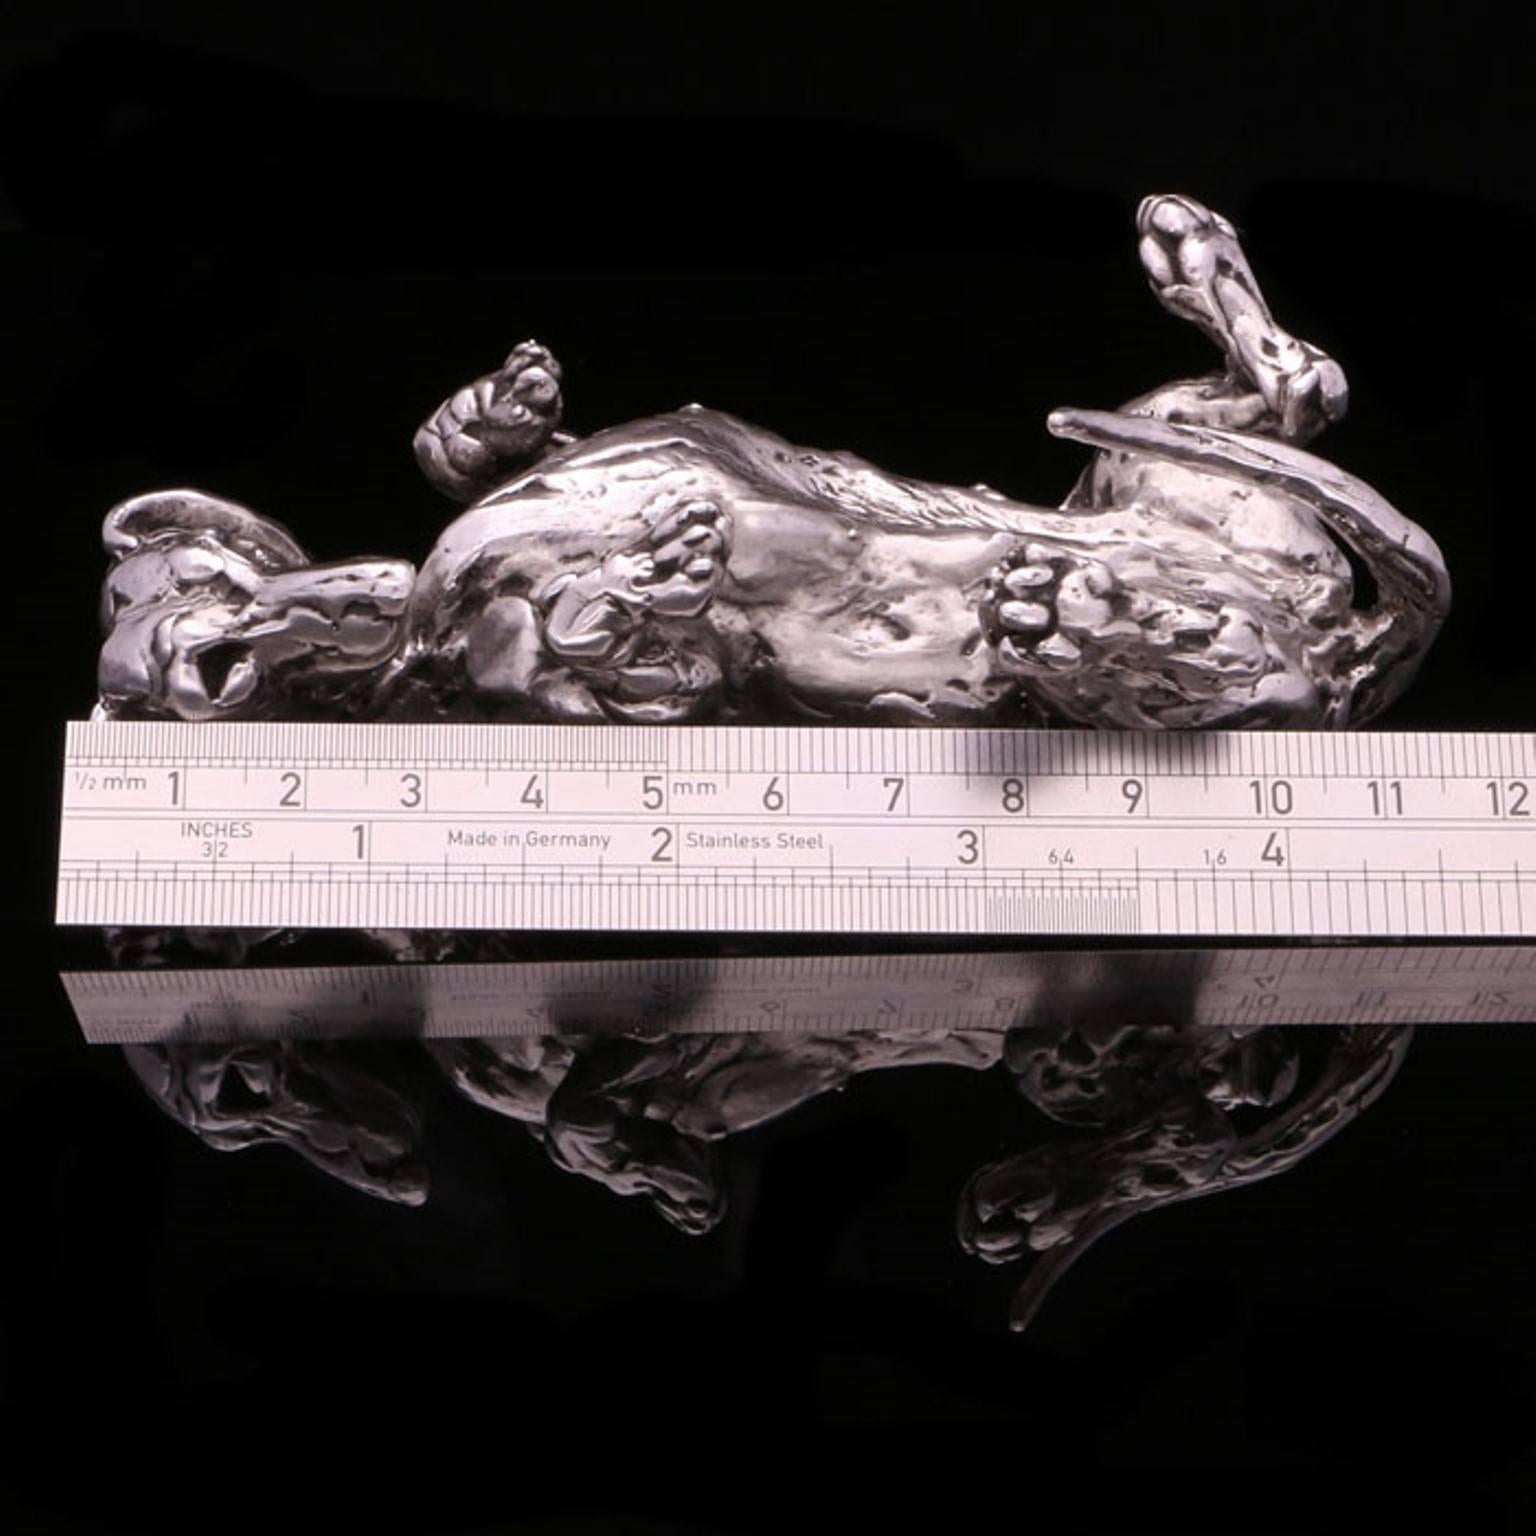 'Rolling terrier' sterling silver sculpture - Contemporary Sculpture by Lucy Kinsella